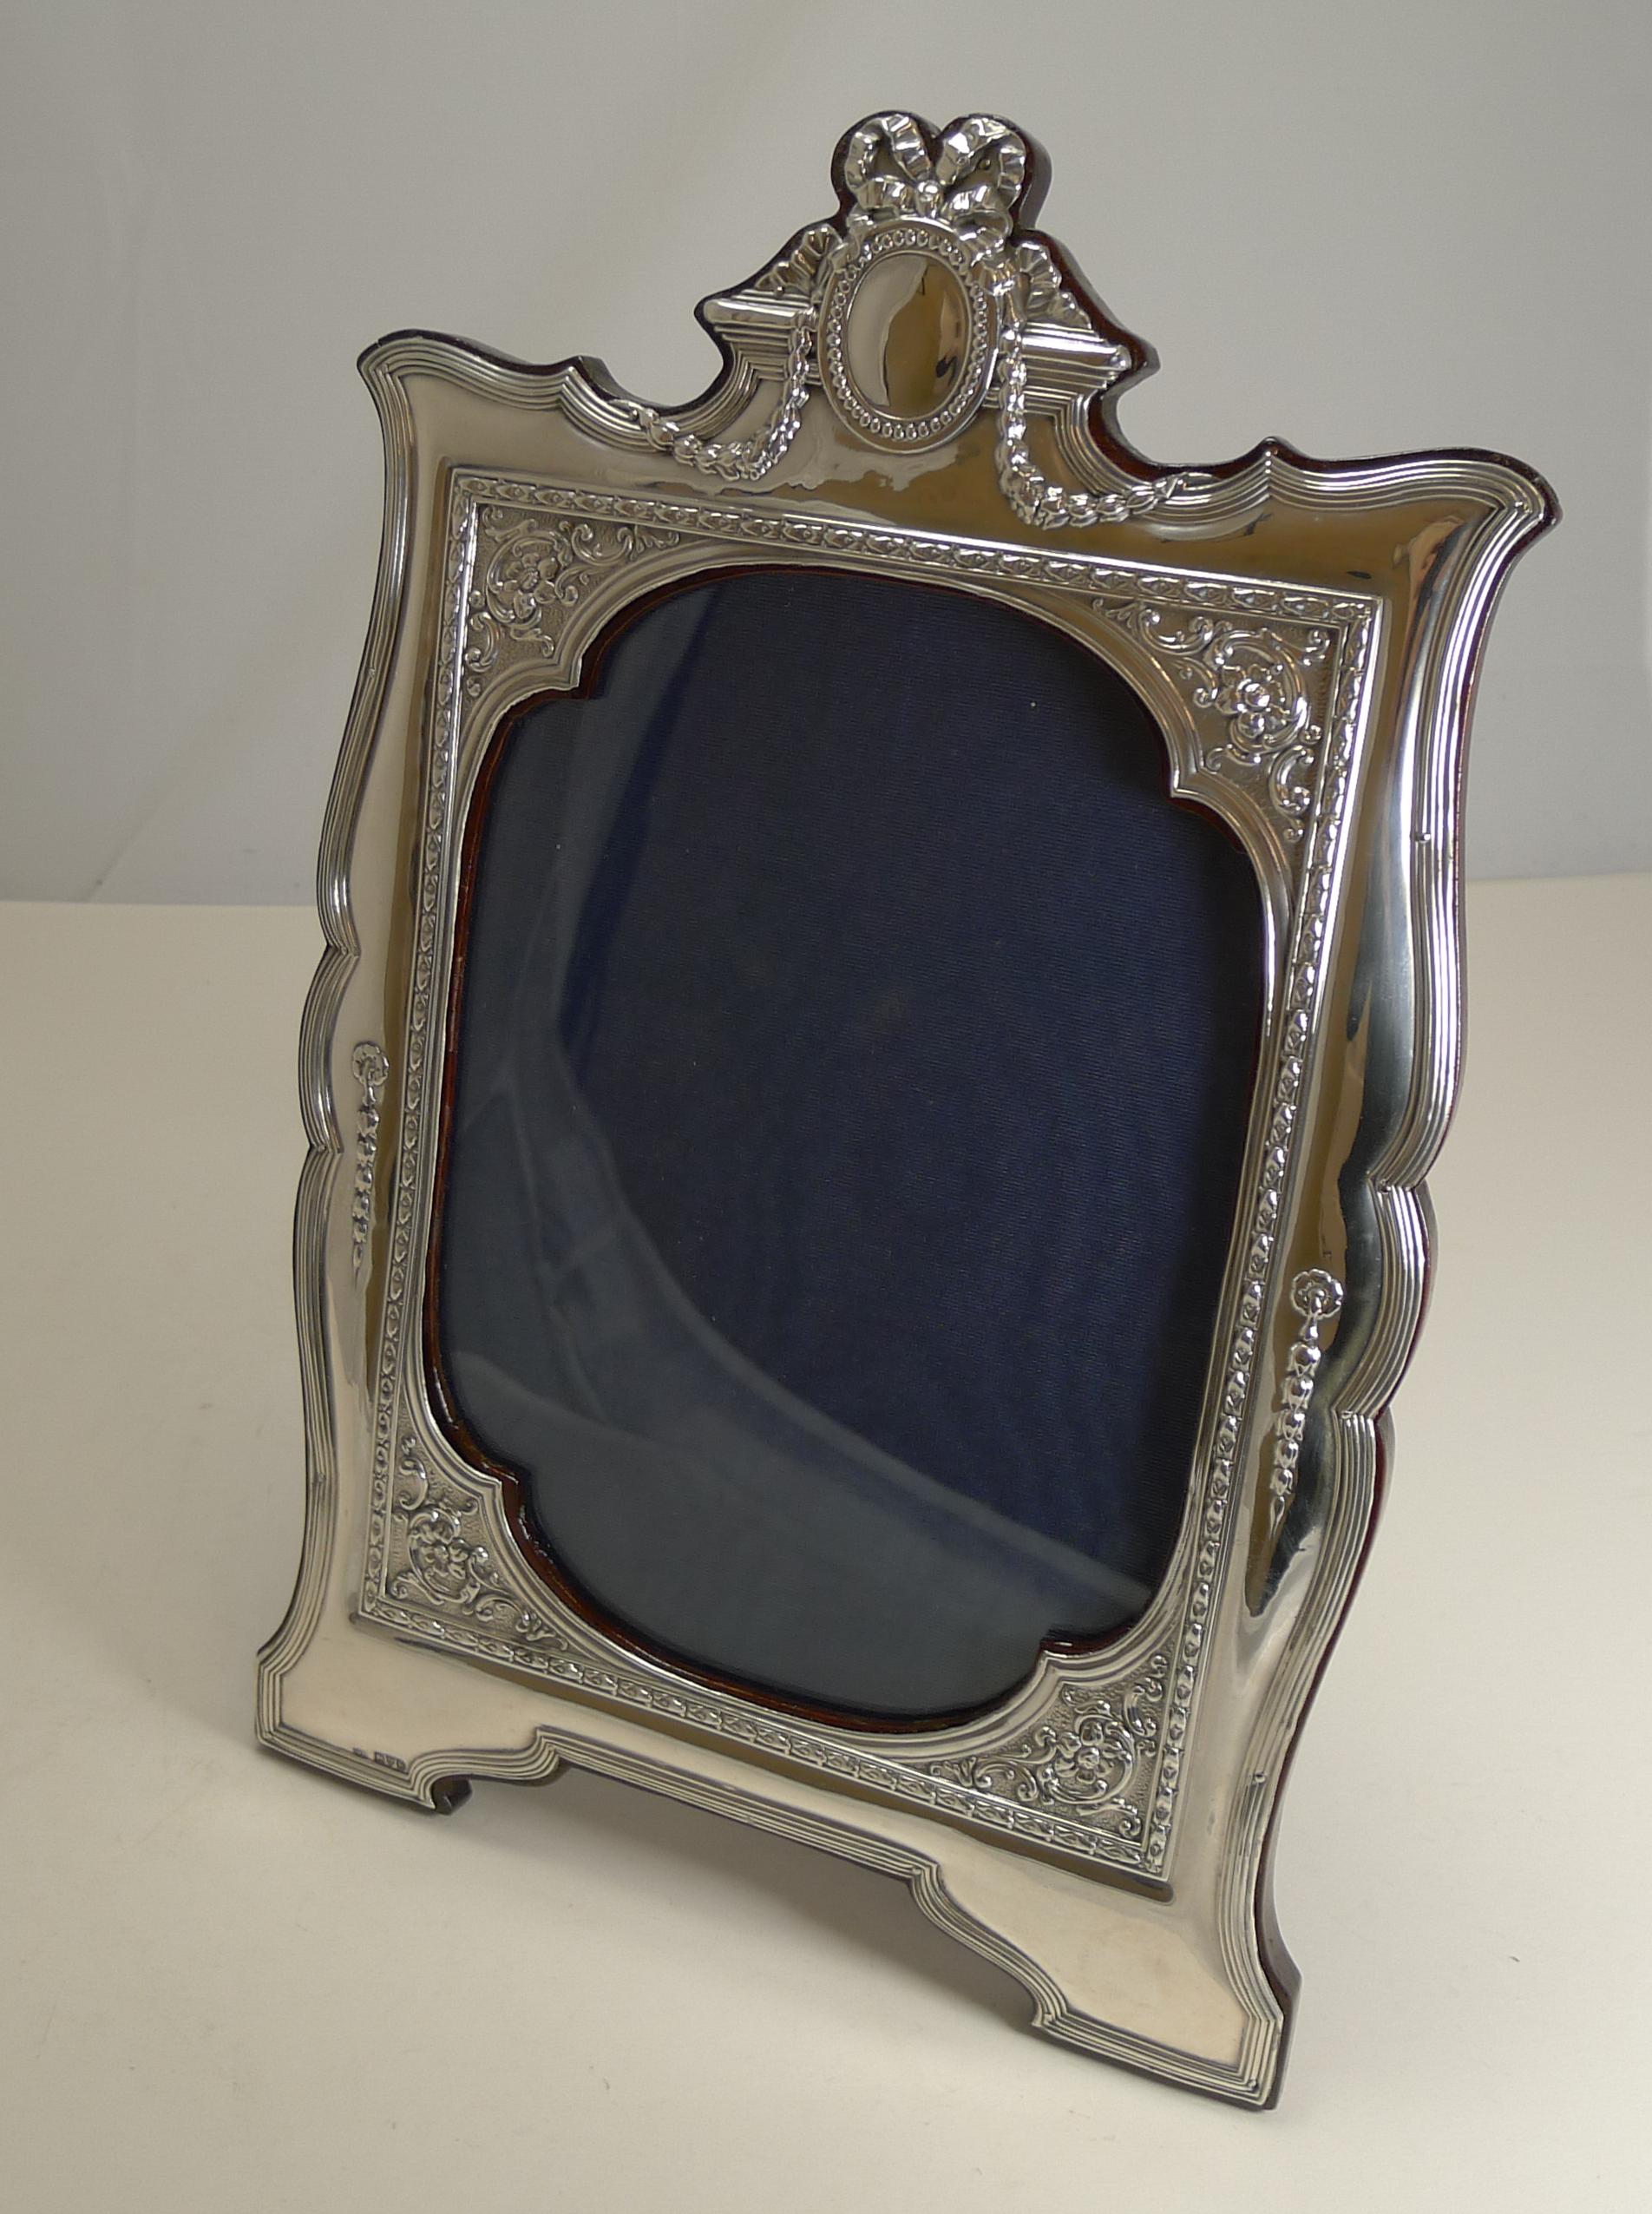 Edwardian Magnificent and Grand English Sterling Silver Photograph Frame, 1910